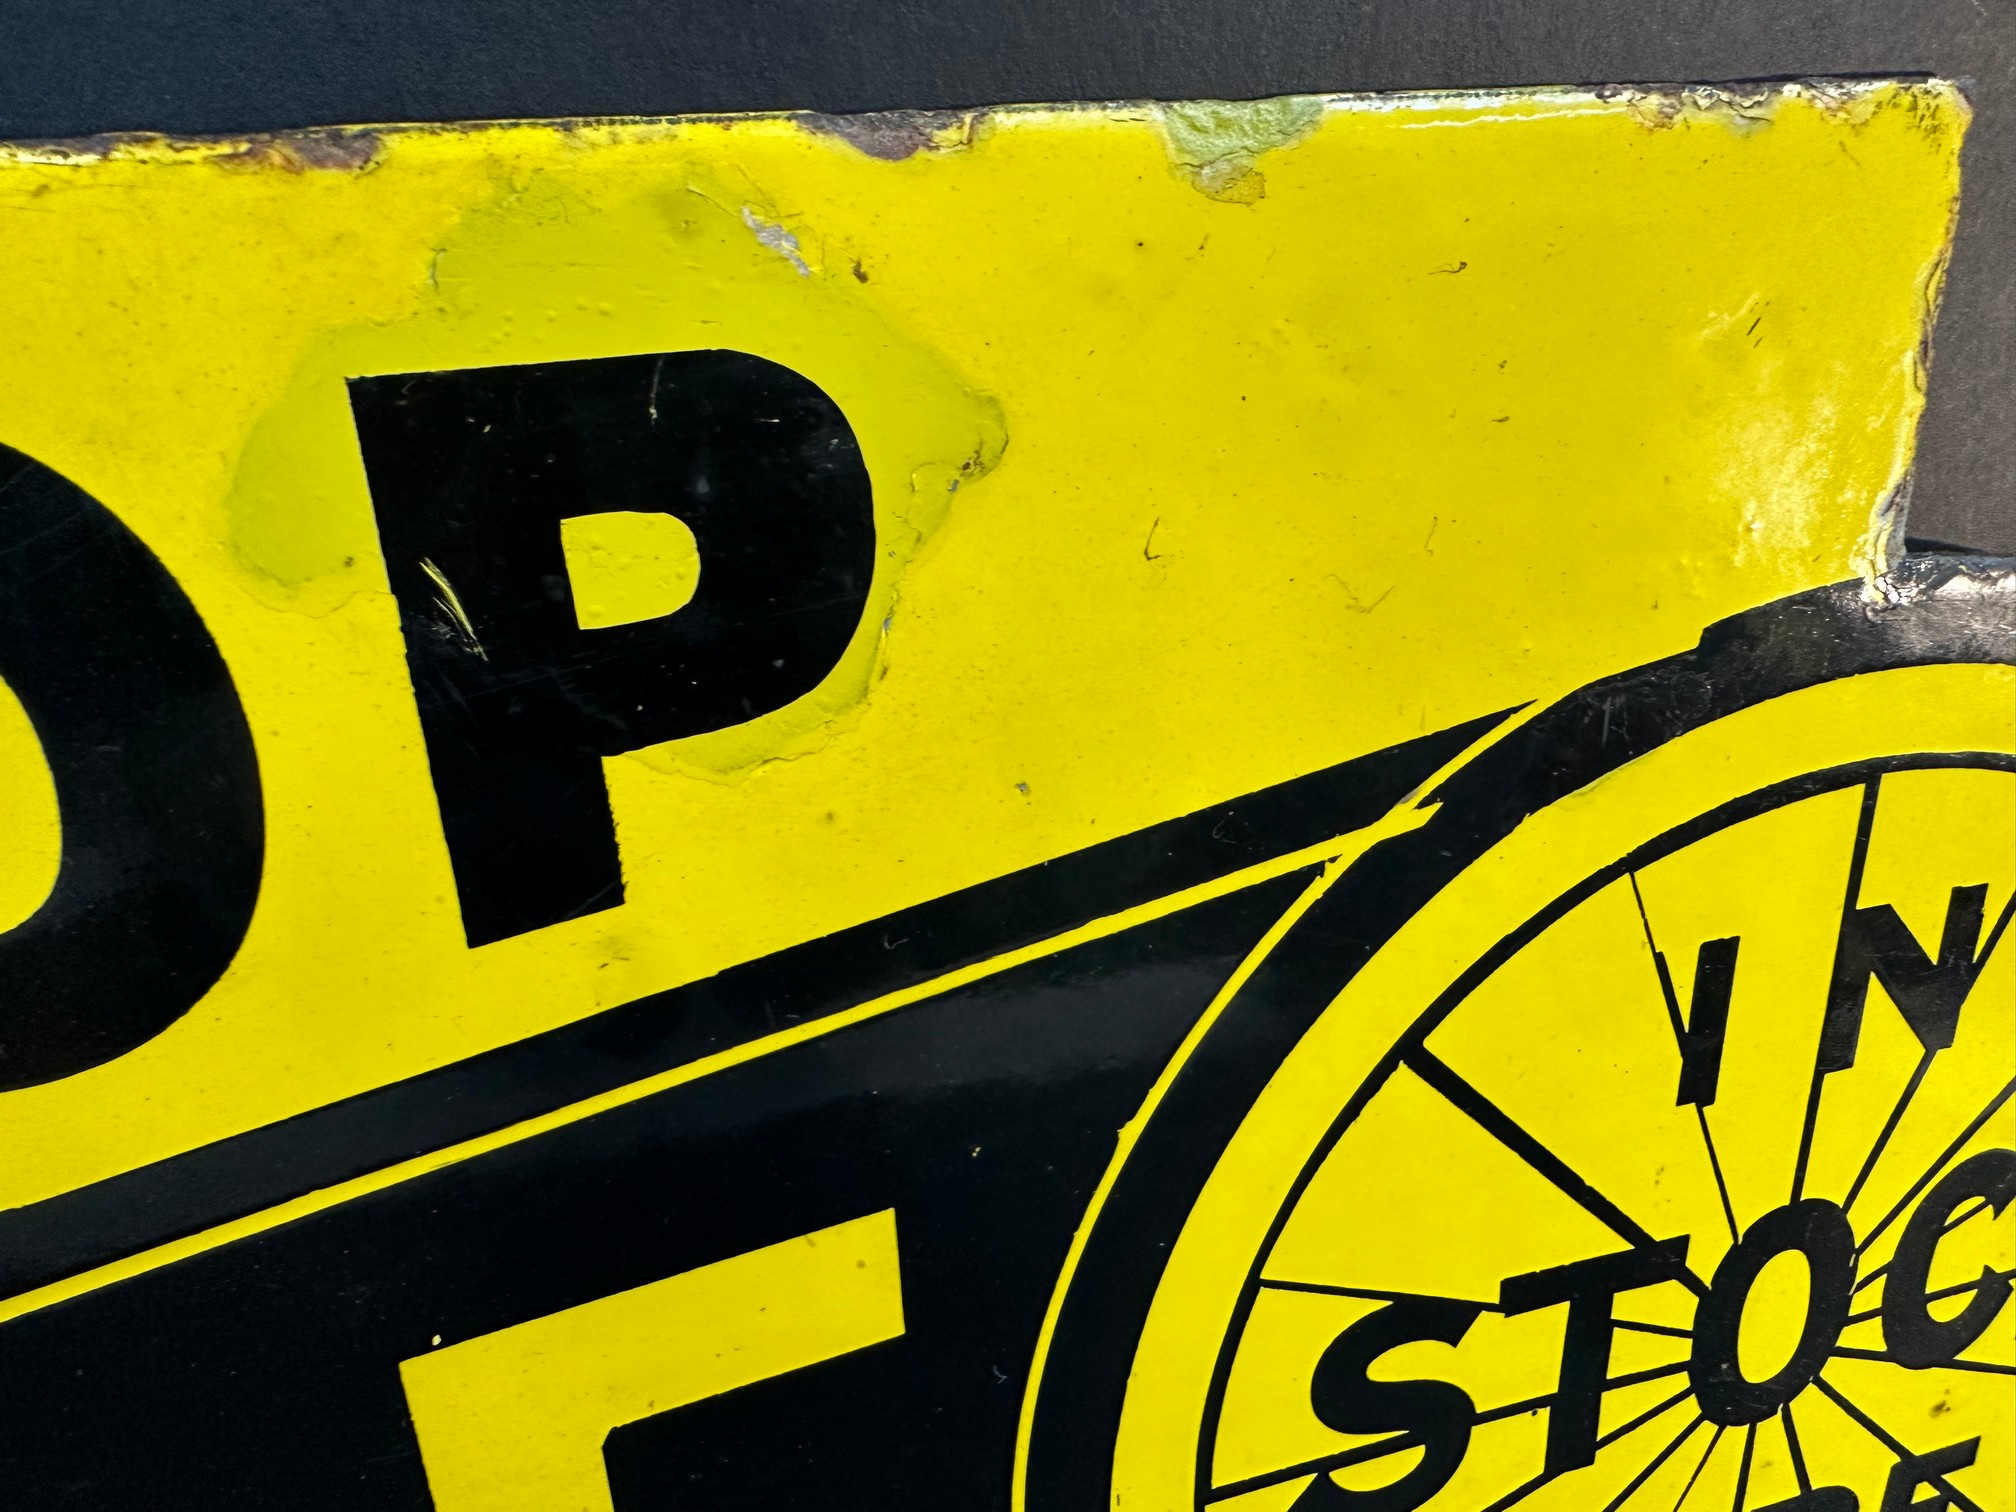 A Dunlop Cycle Tyres In Stock Here double sided enamel sign with hanging flange, some older spots of - Image 3 of 9